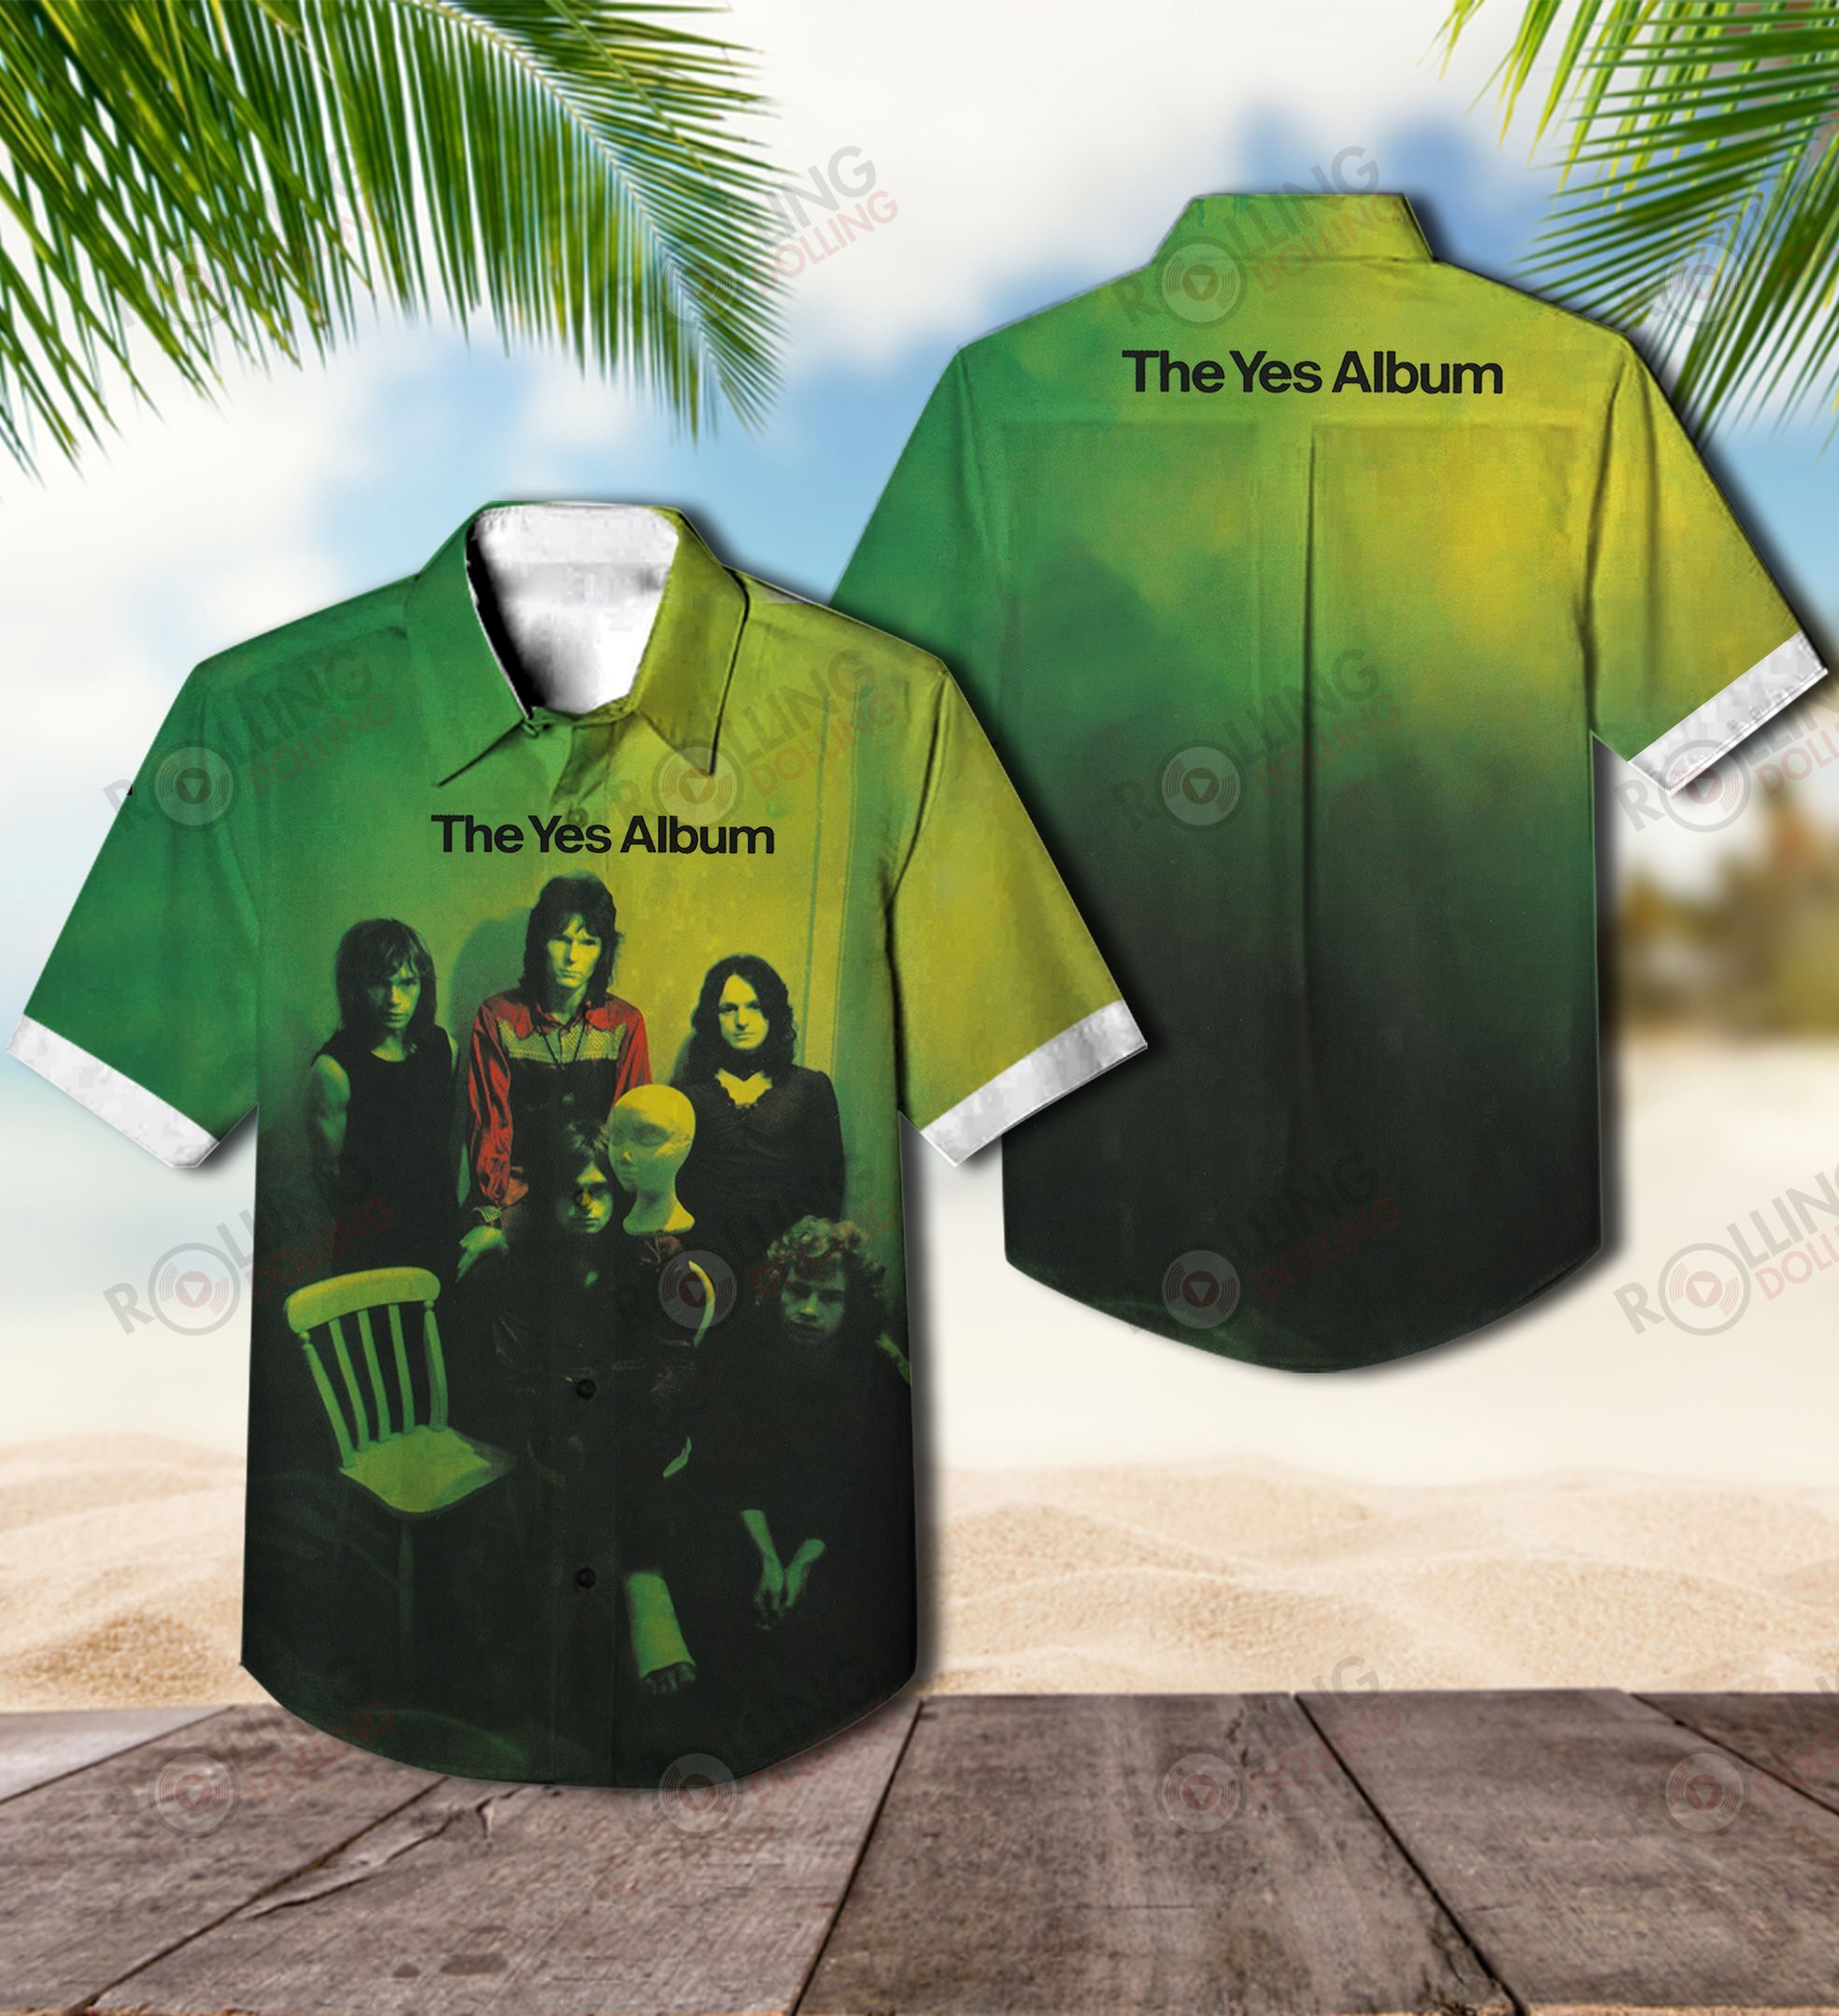 This would make a great gift for any fan who loves Hawaiian Shirt as well as Rock band 44